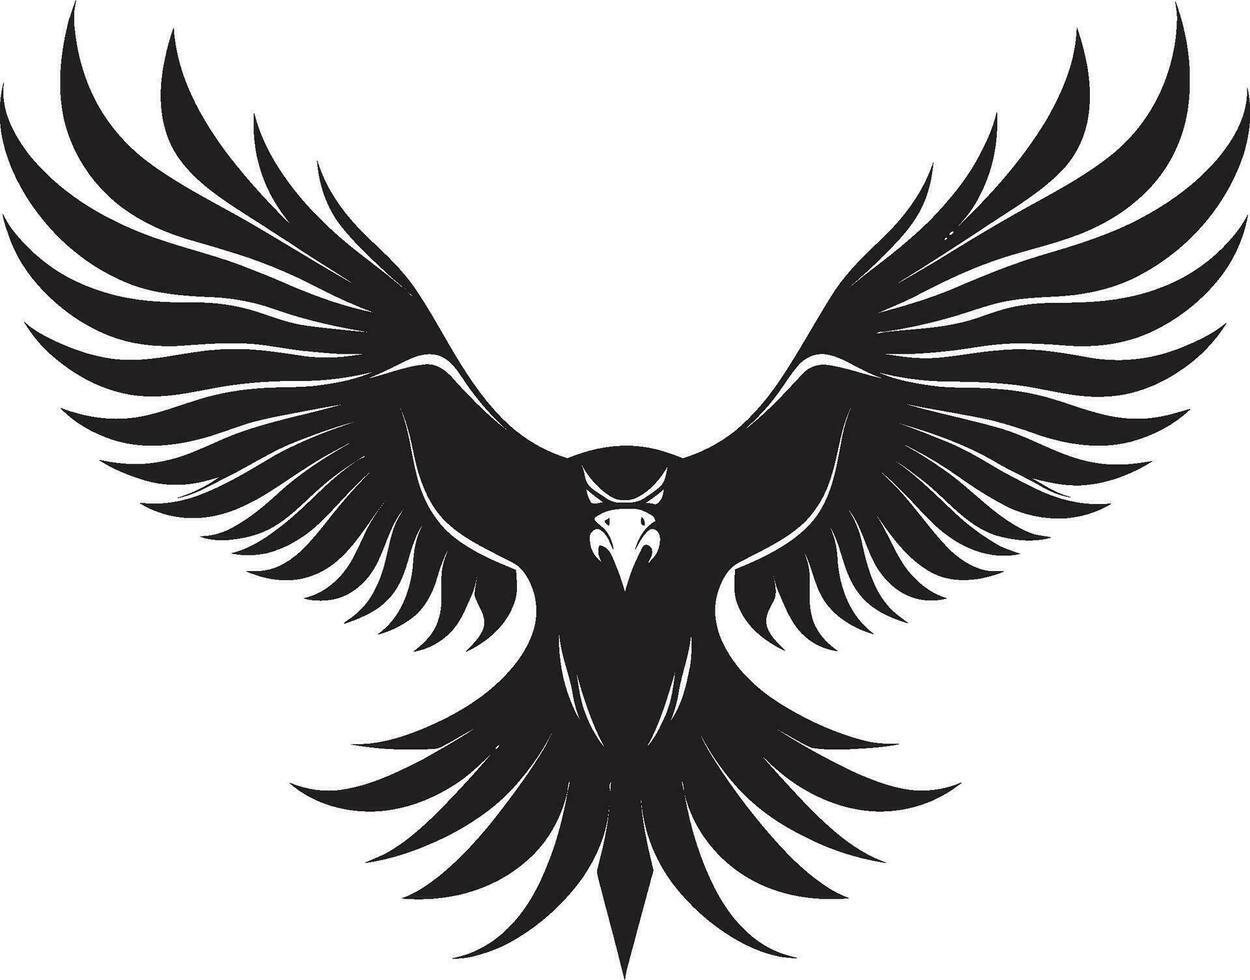 Iconic Symbol Unveiled Black Emblem Black and Fearless Eagle Vector